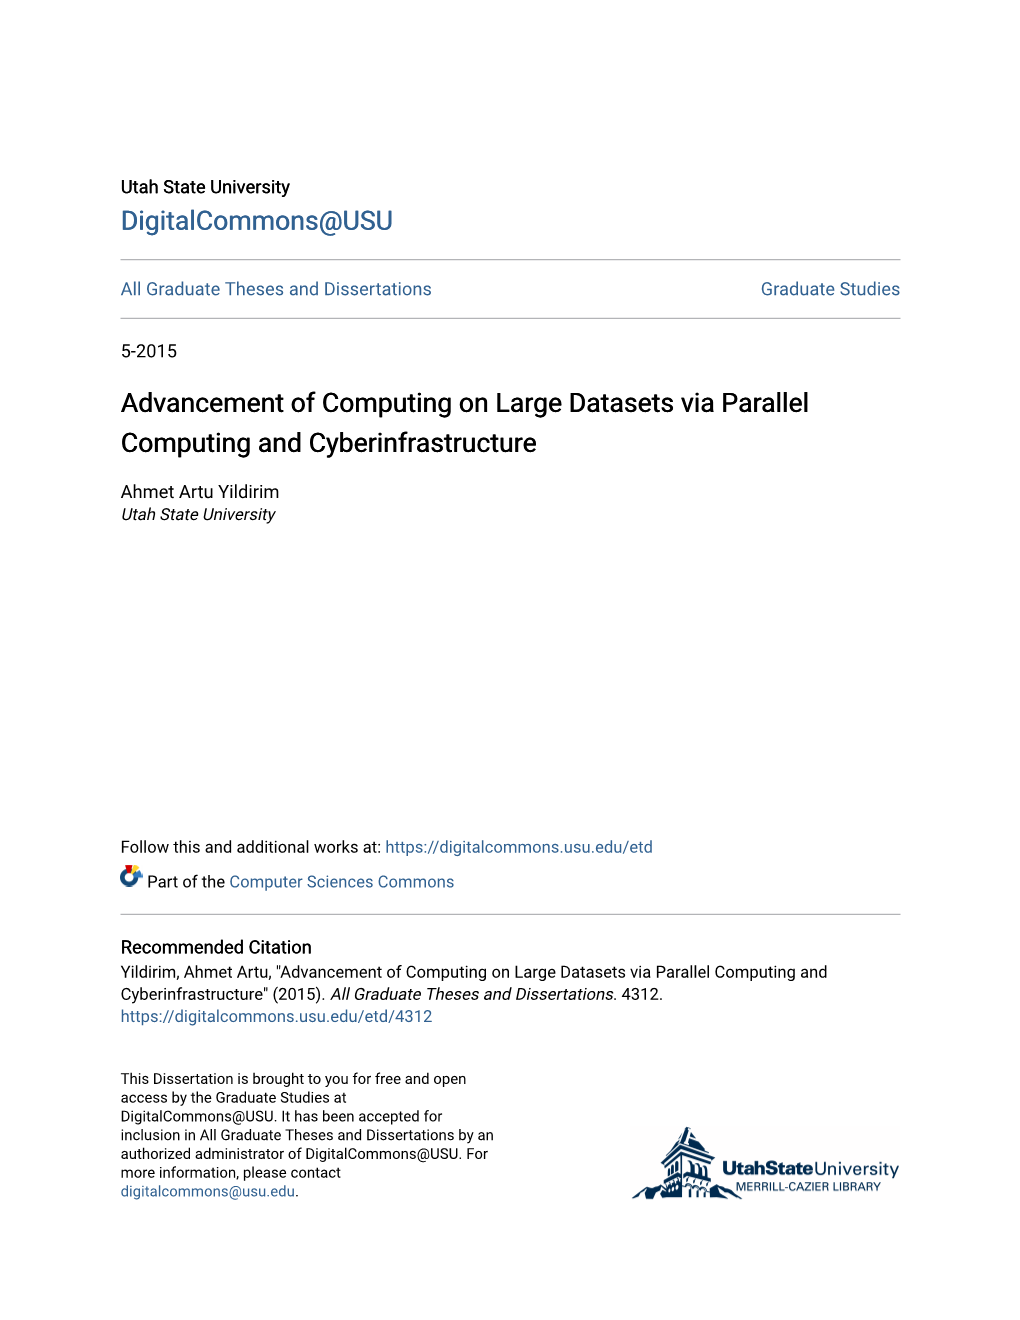 Advancement of Computing on Large Datasets Via Parallel Computing and Cyberinfrastructure